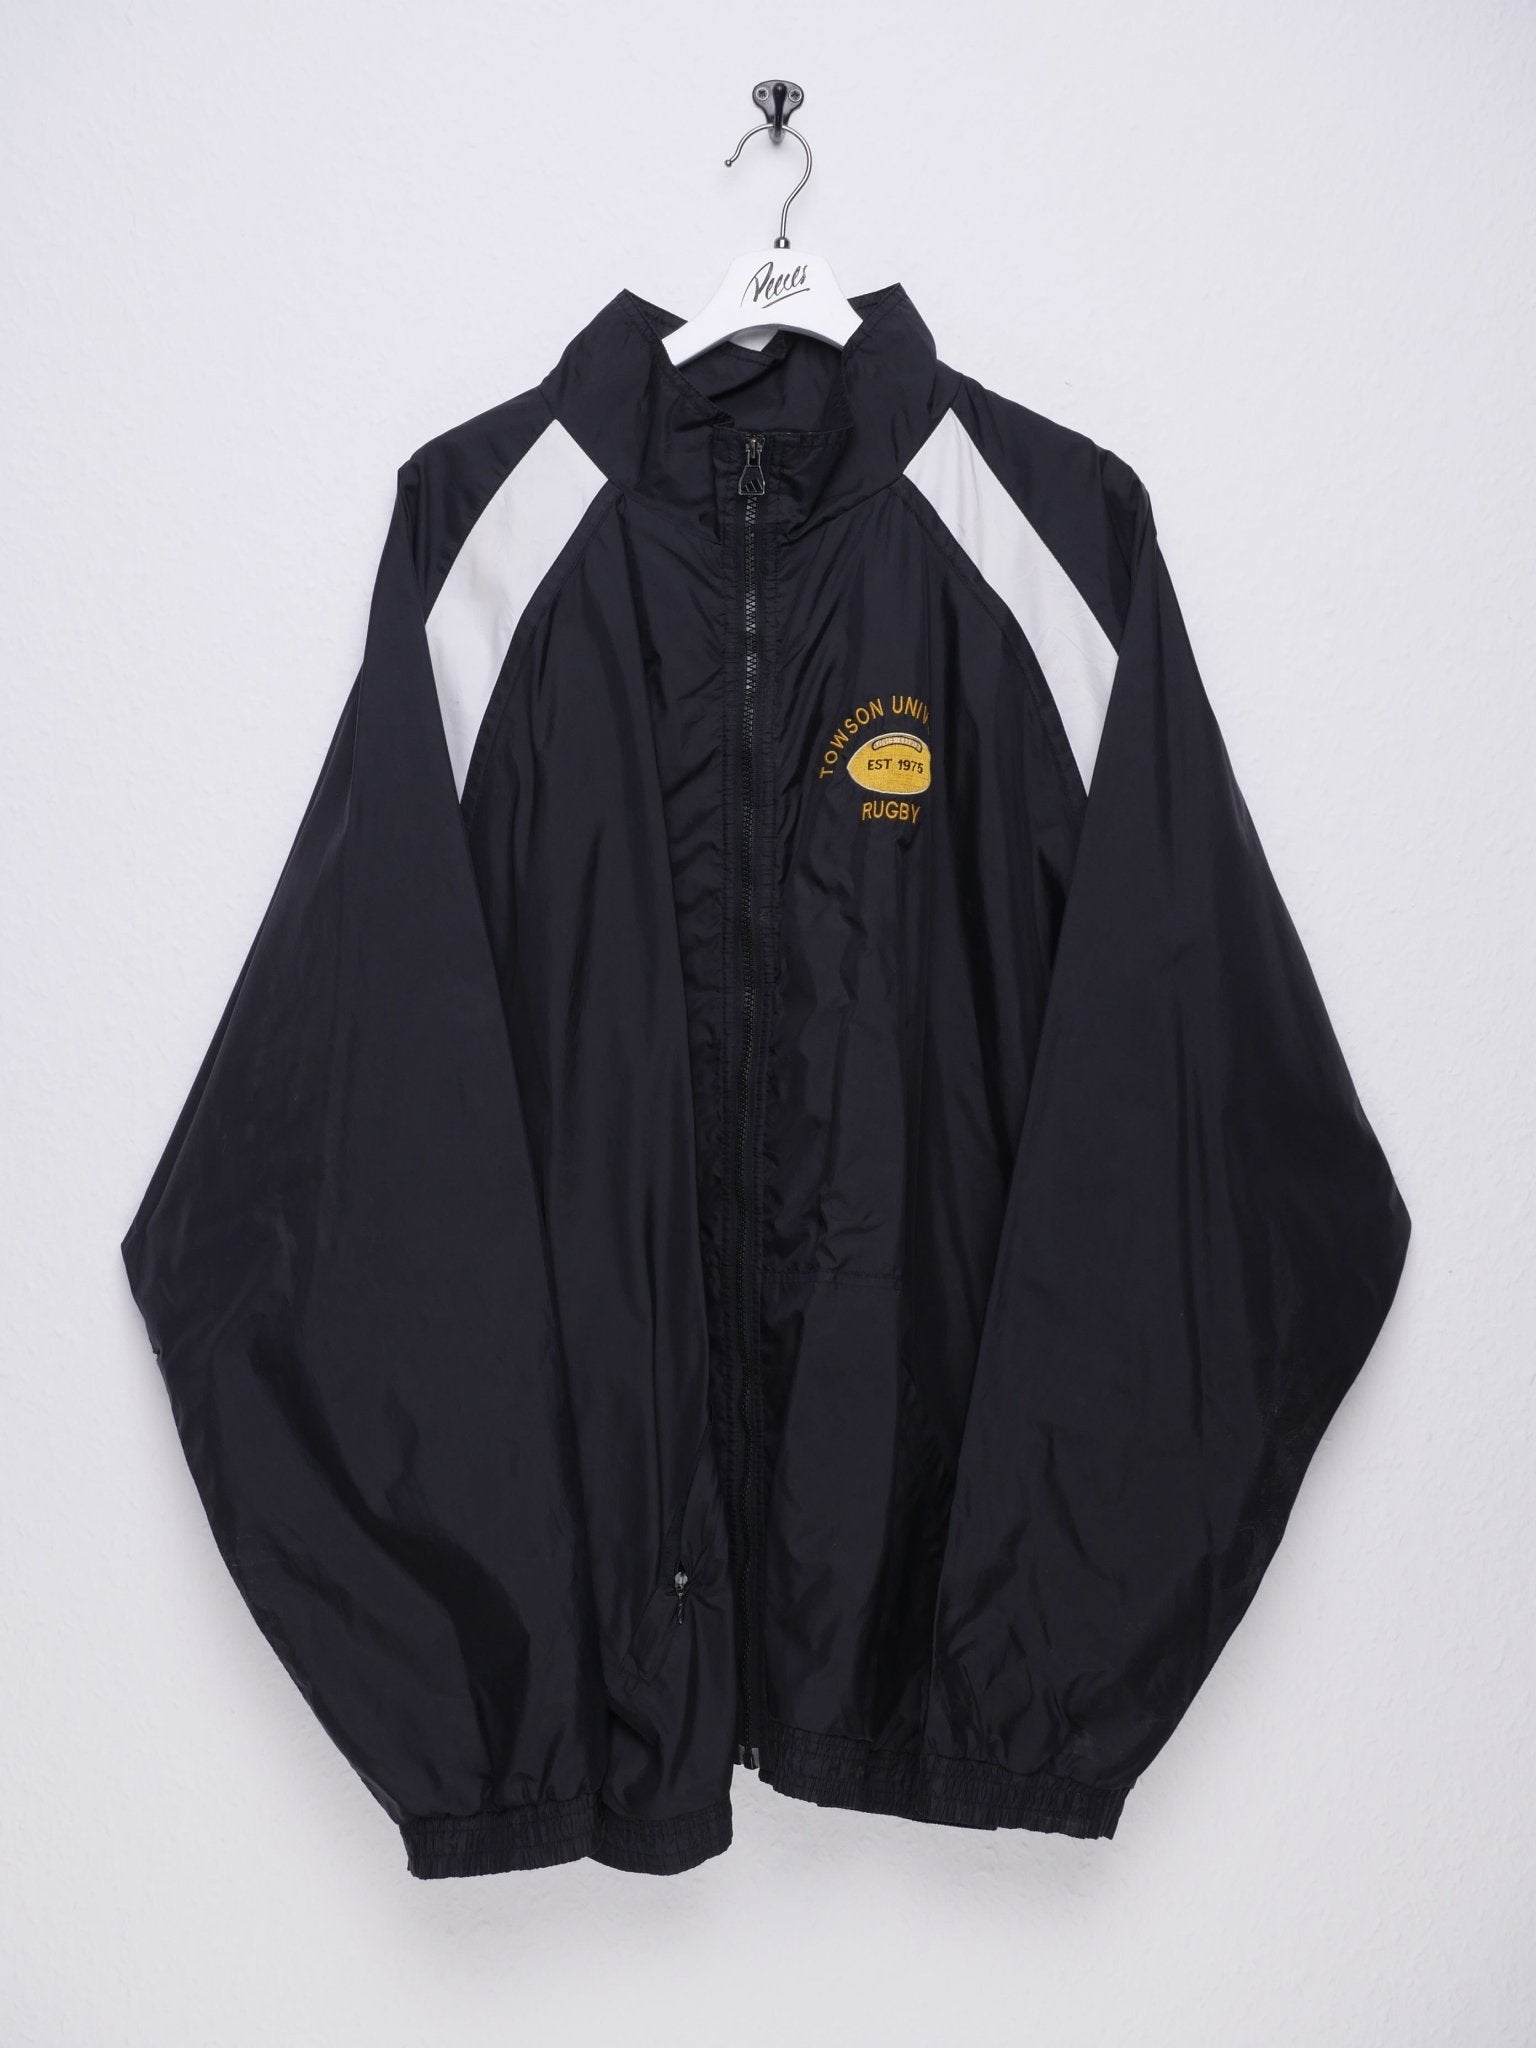 adidas embroidered Logo 'Towson University Rugby' two toned Track Jacket - Peeces